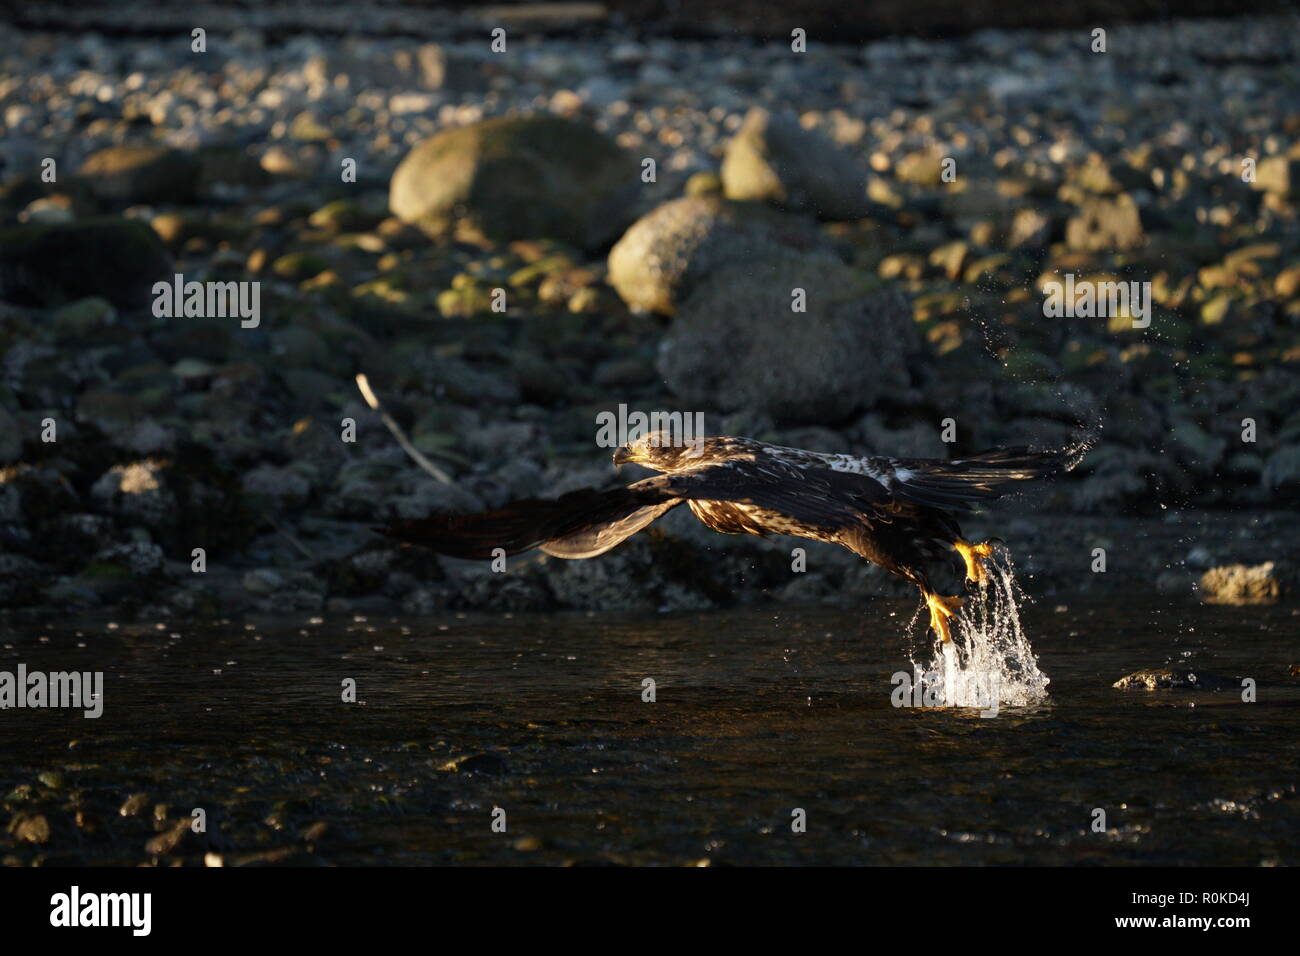 A juvenile bald eagle taking off from water in Sunshine Coast BC Canada, very powerful and majestic Stock Photo